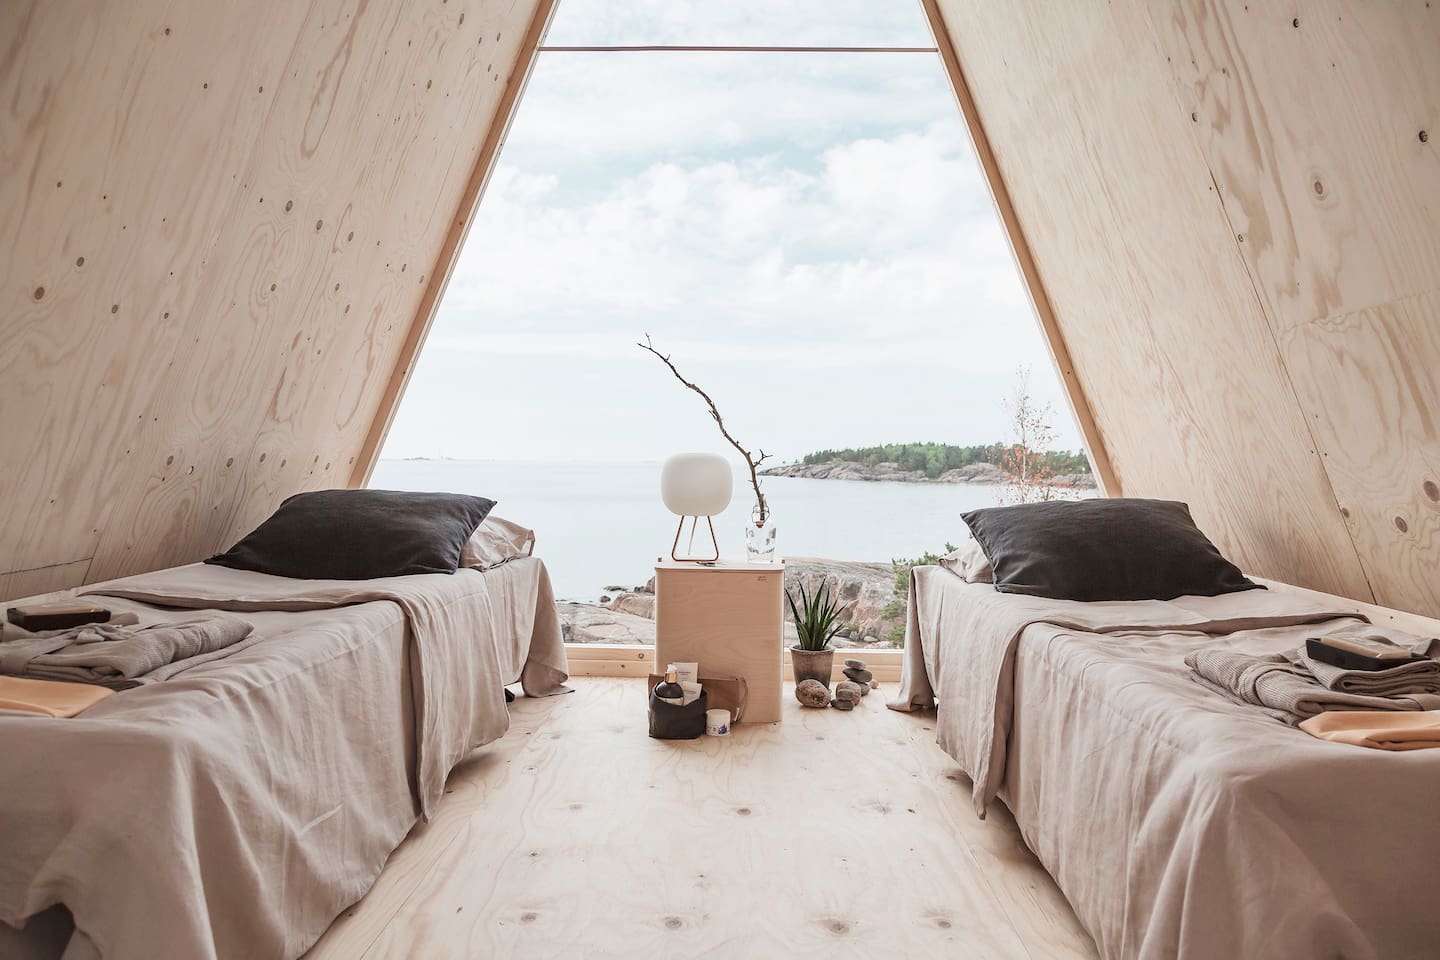 The cabin features two camp beds with a breathtaking view of the archipelago. 